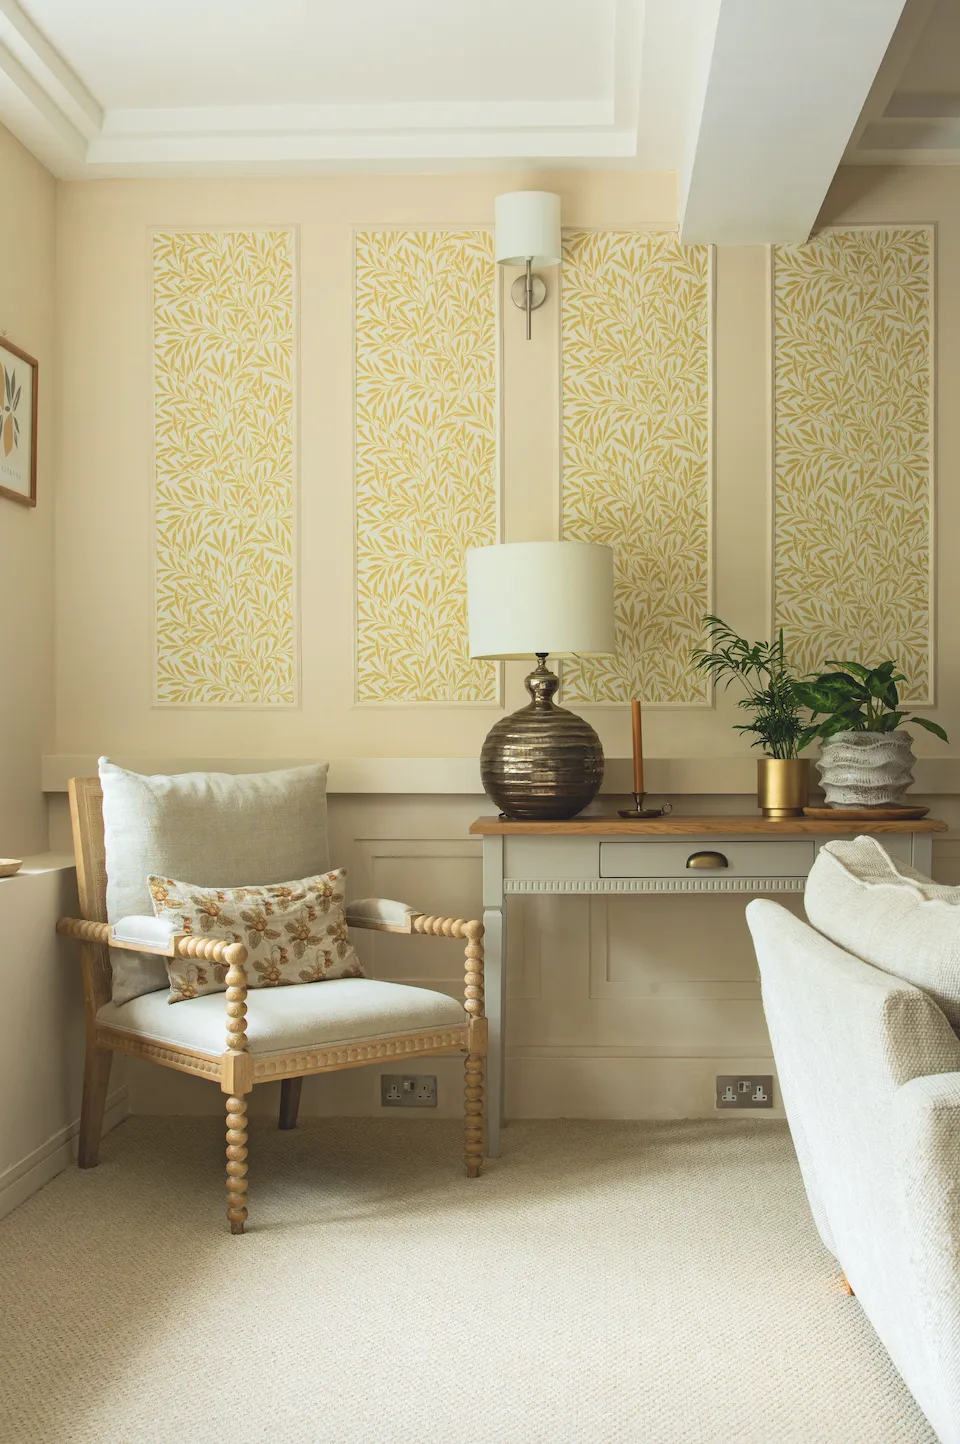 Wallpapering inside of the DIY panelling with a tonal leaf design adds a bit of pattern and lifts this corner of the living room